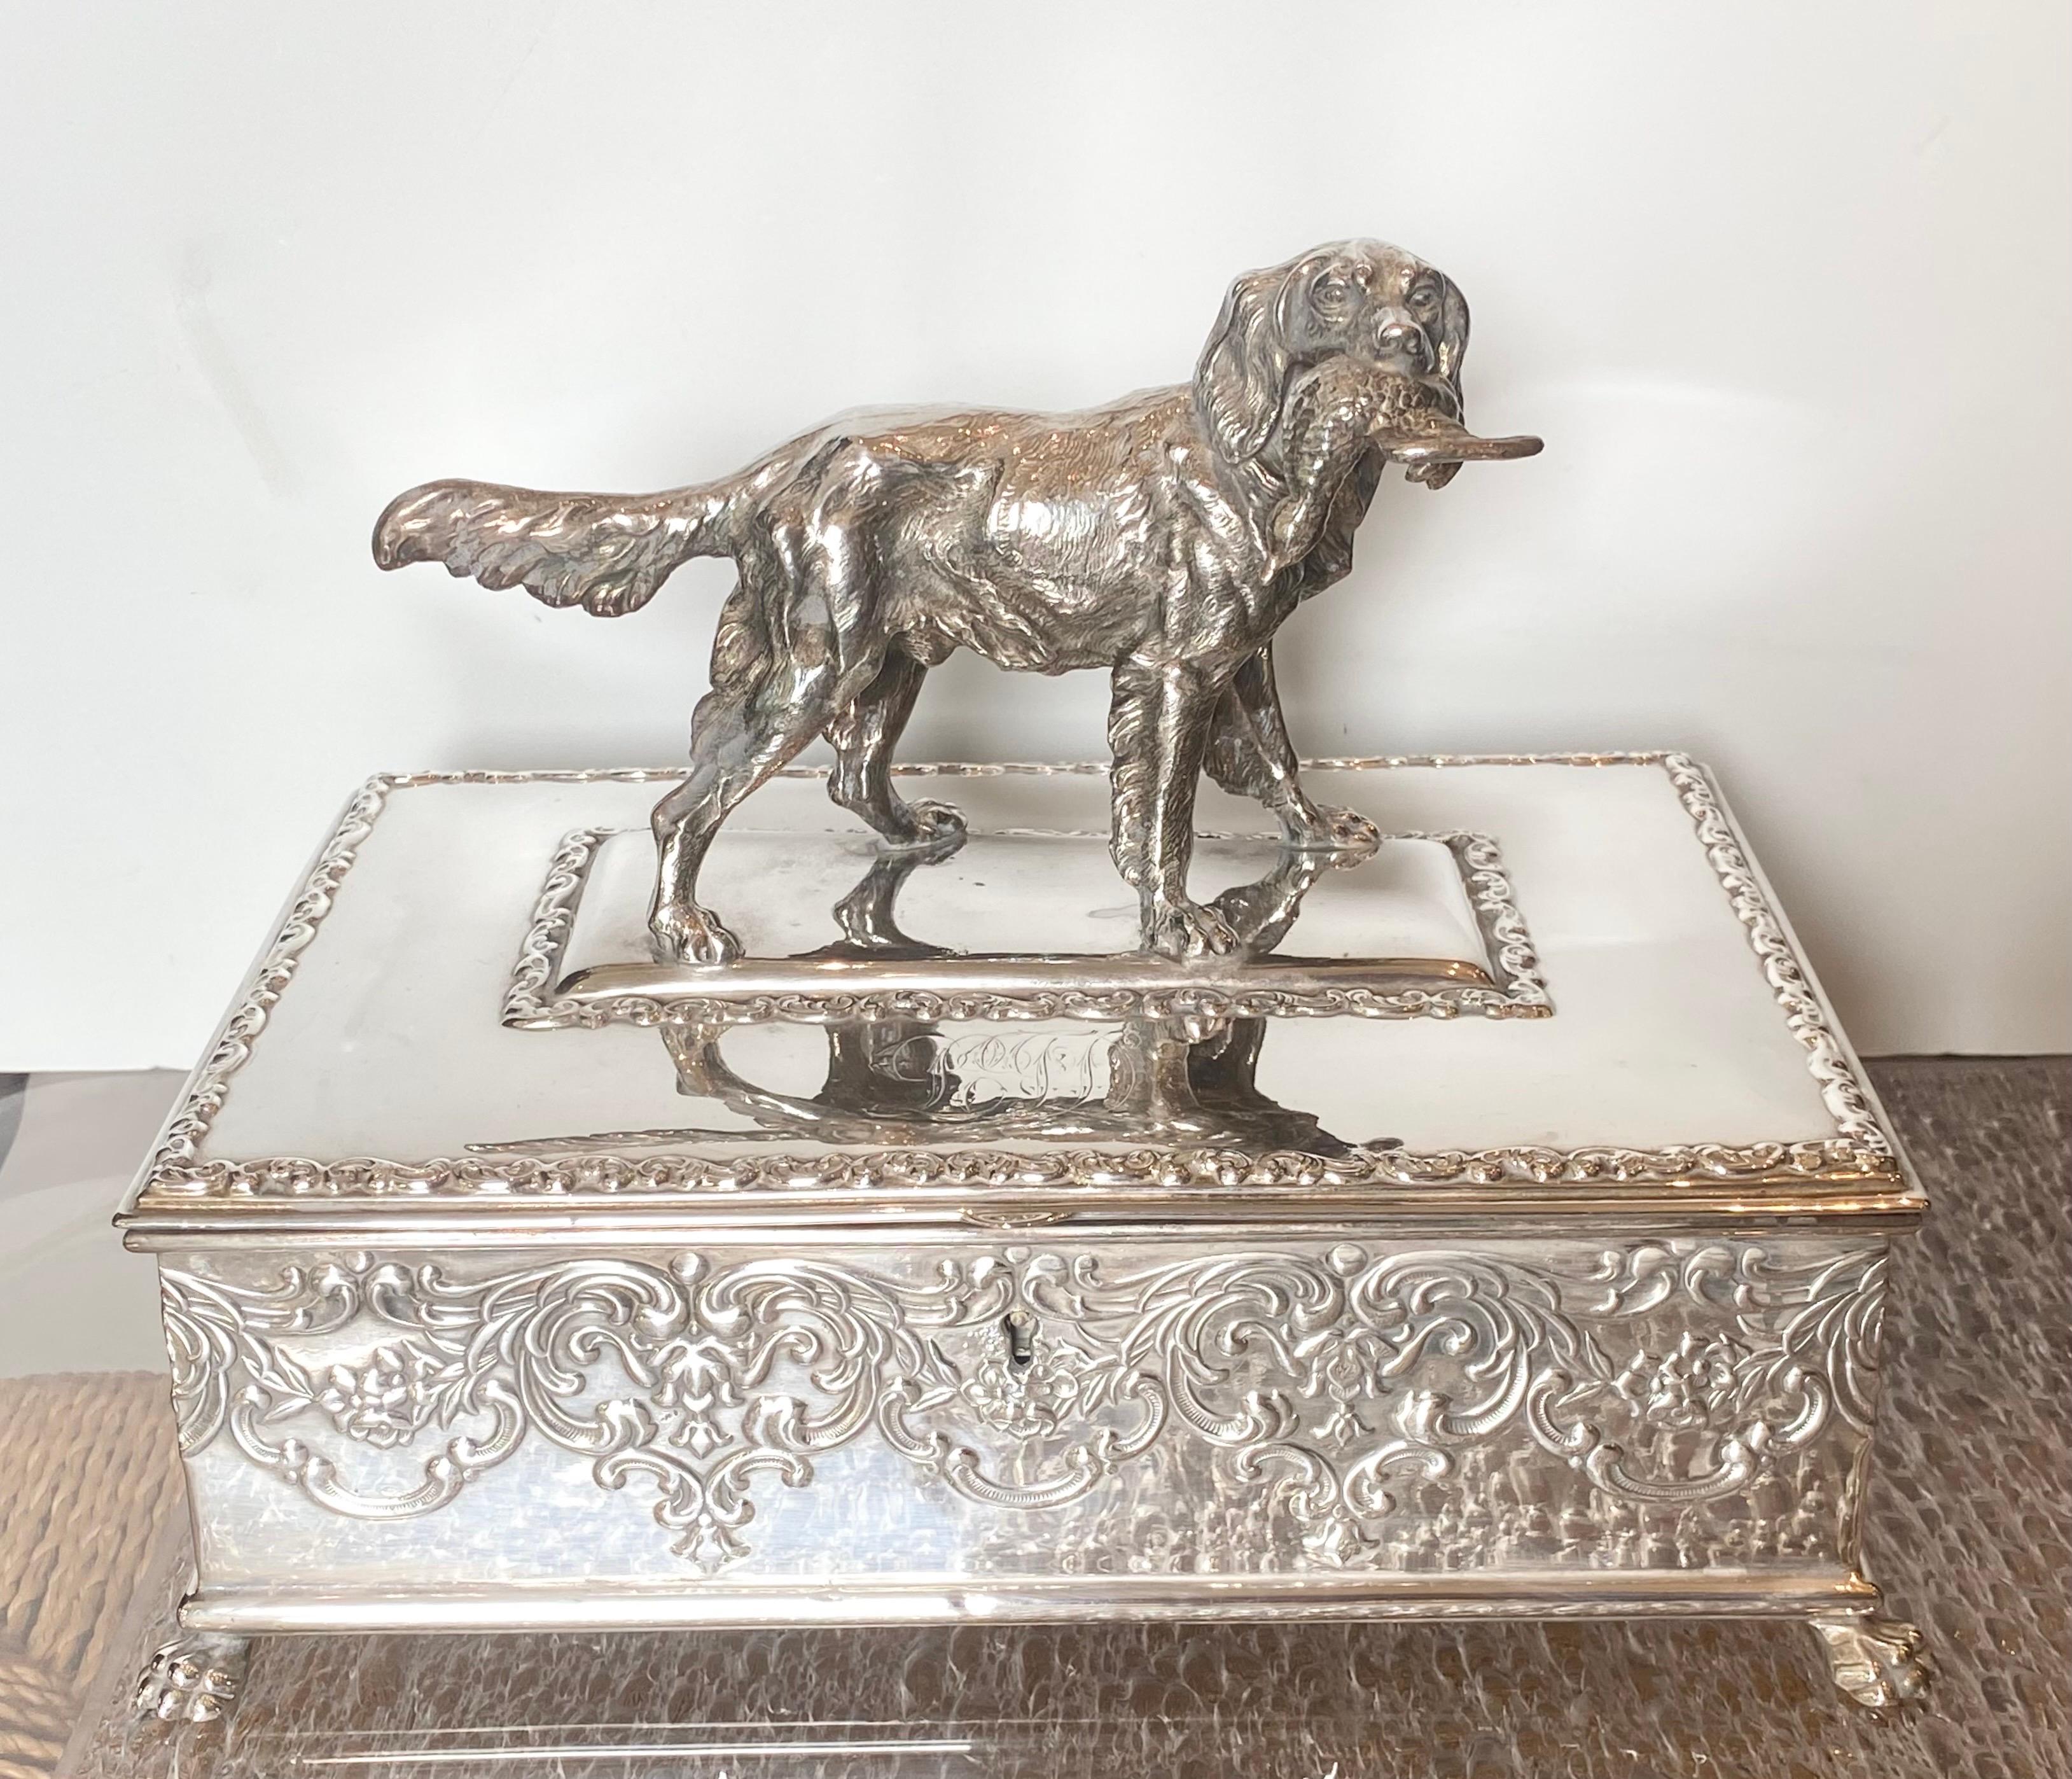 American silver plate humidor, Wilcox Silver Plate Co., Meriden, CT hinged lid with figure of retriever with duck, box with repousse scrolled floral and foliate design and paw feet, monogrammed on lid, marked and numbered on bottom.